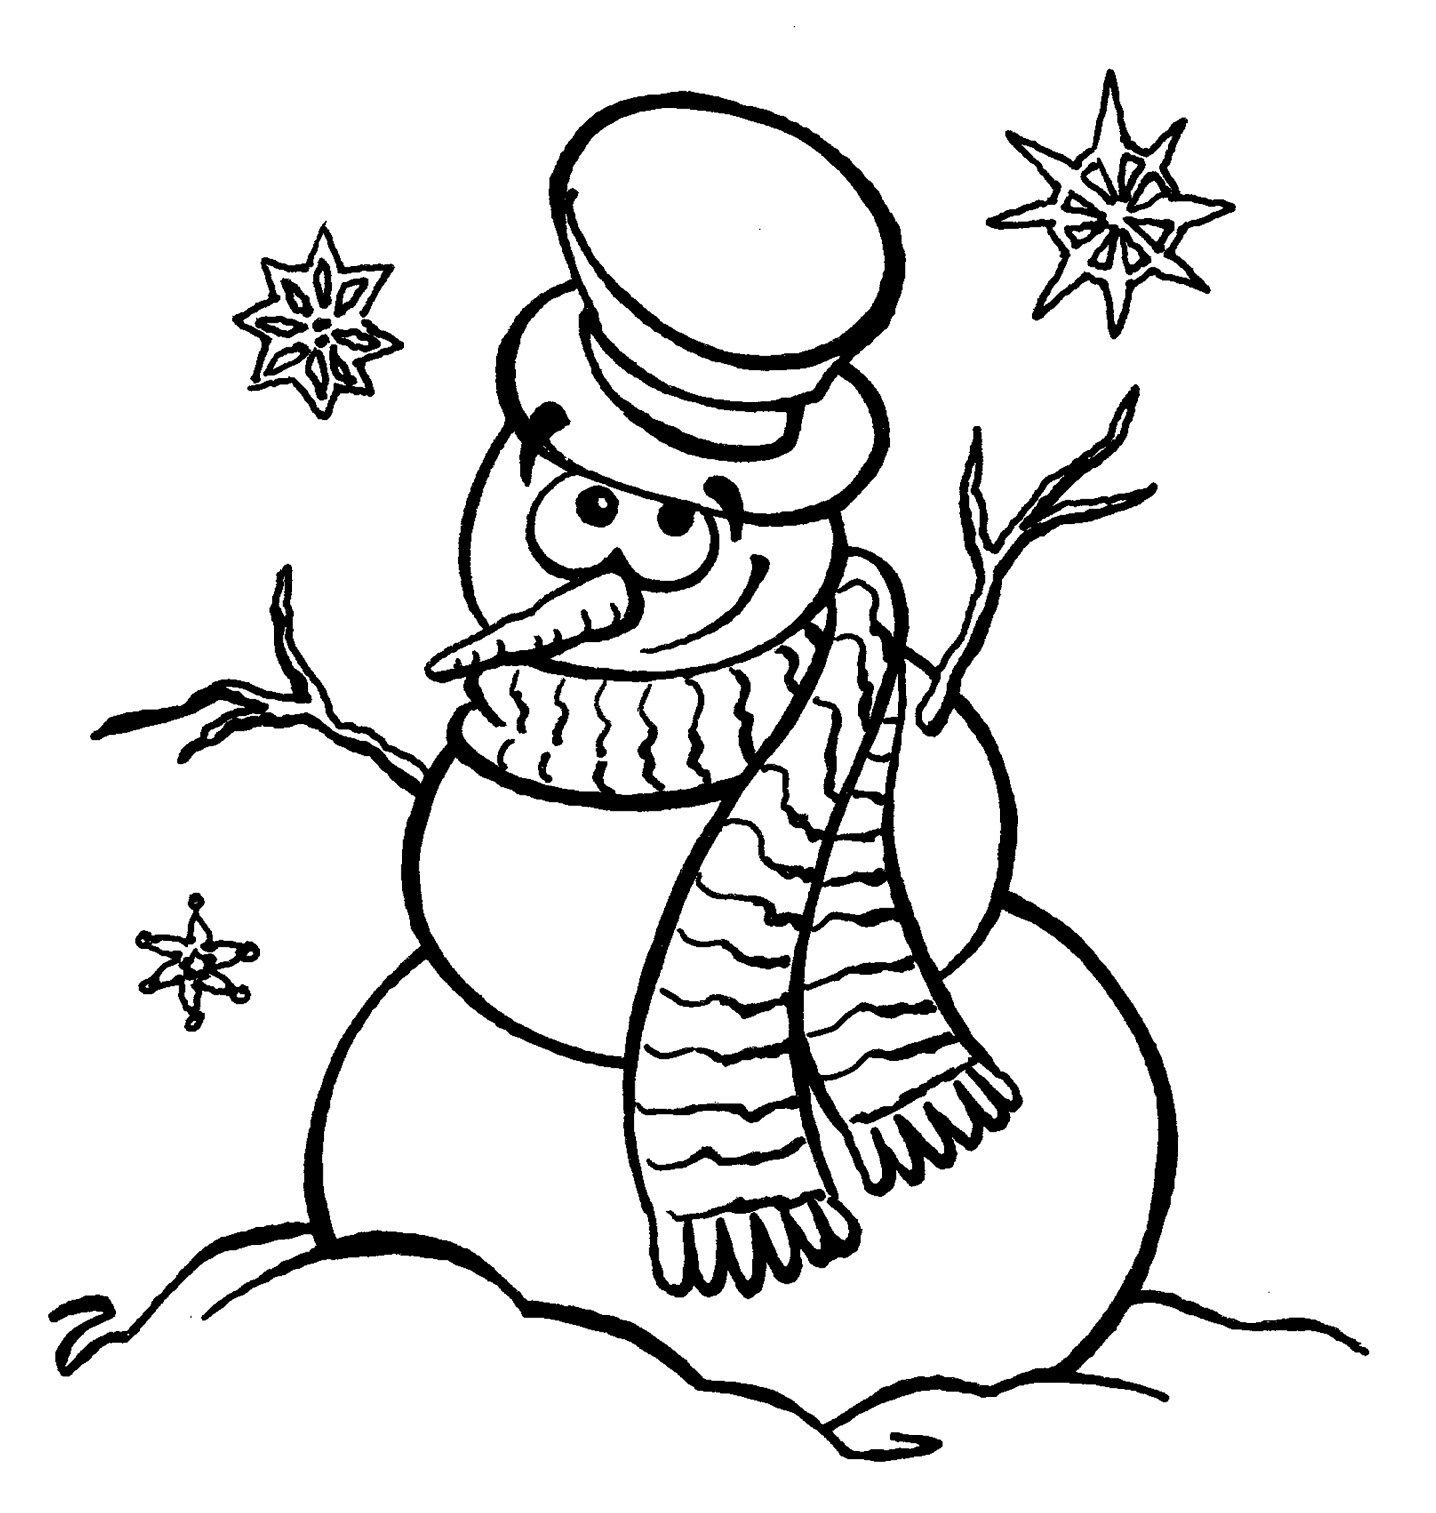 Snowman with examples #4